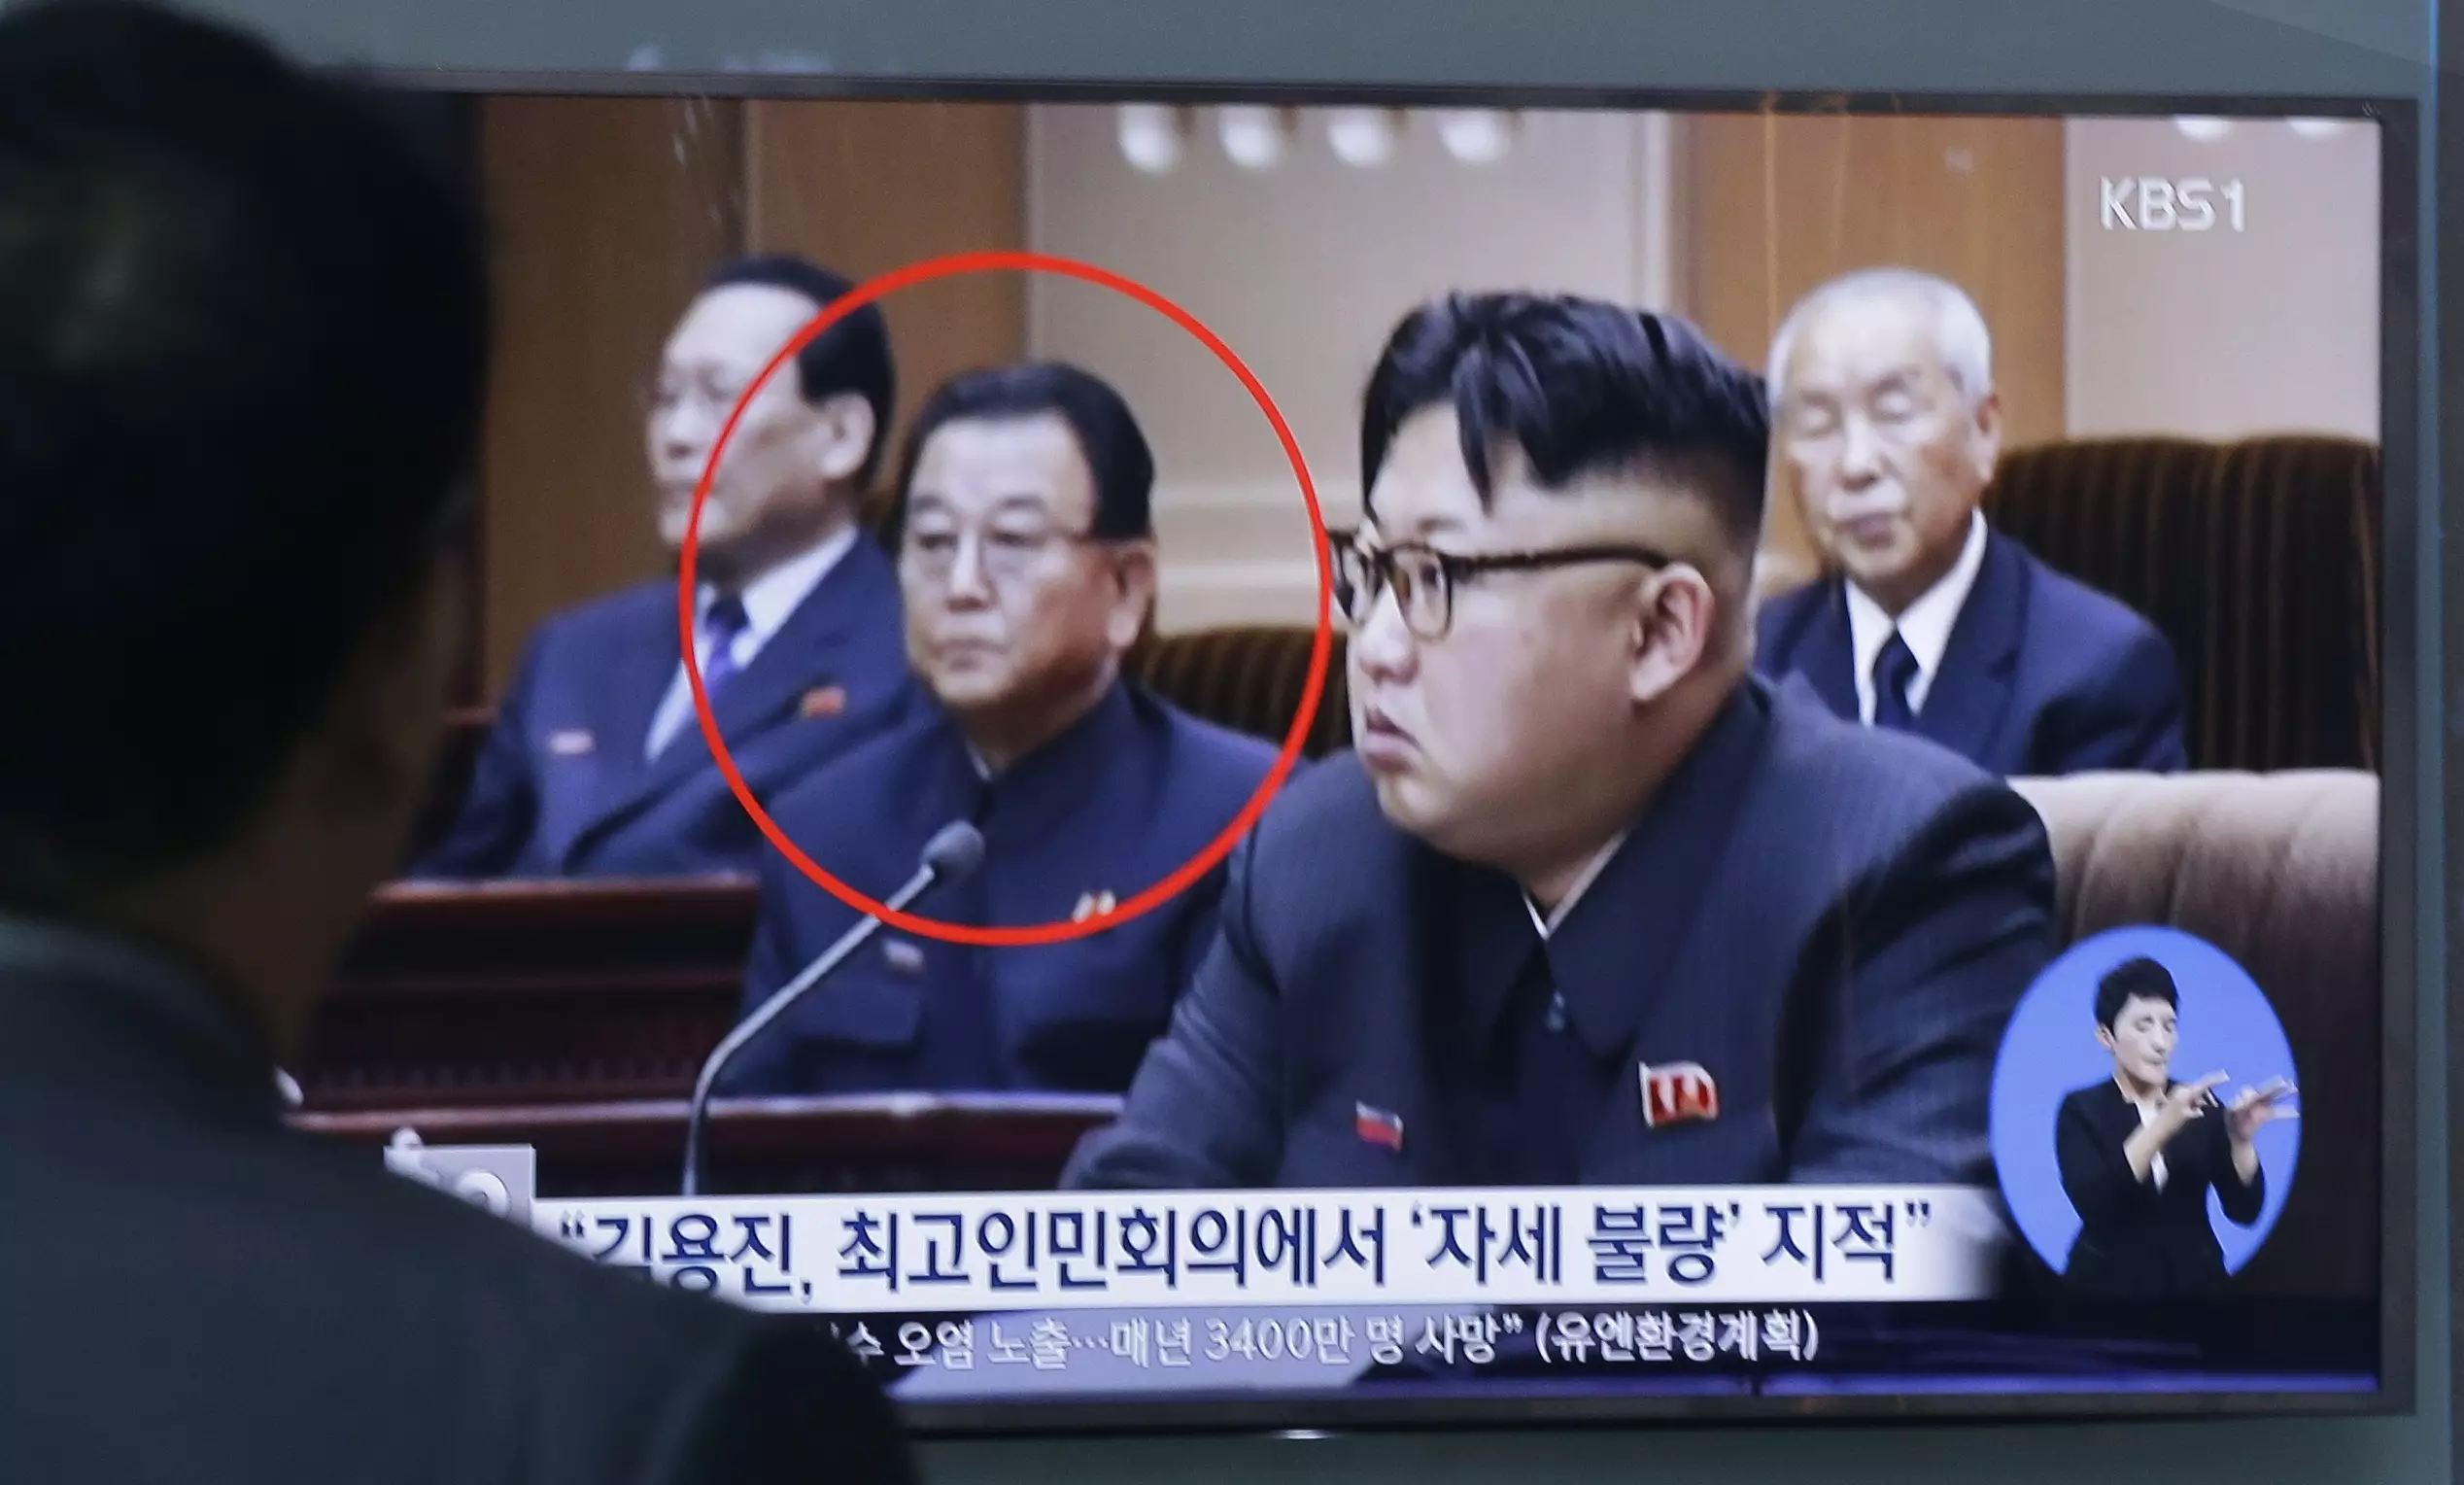 Kim Jong-un Has Executed North Korea's Education Minister For Not Sitting Properly